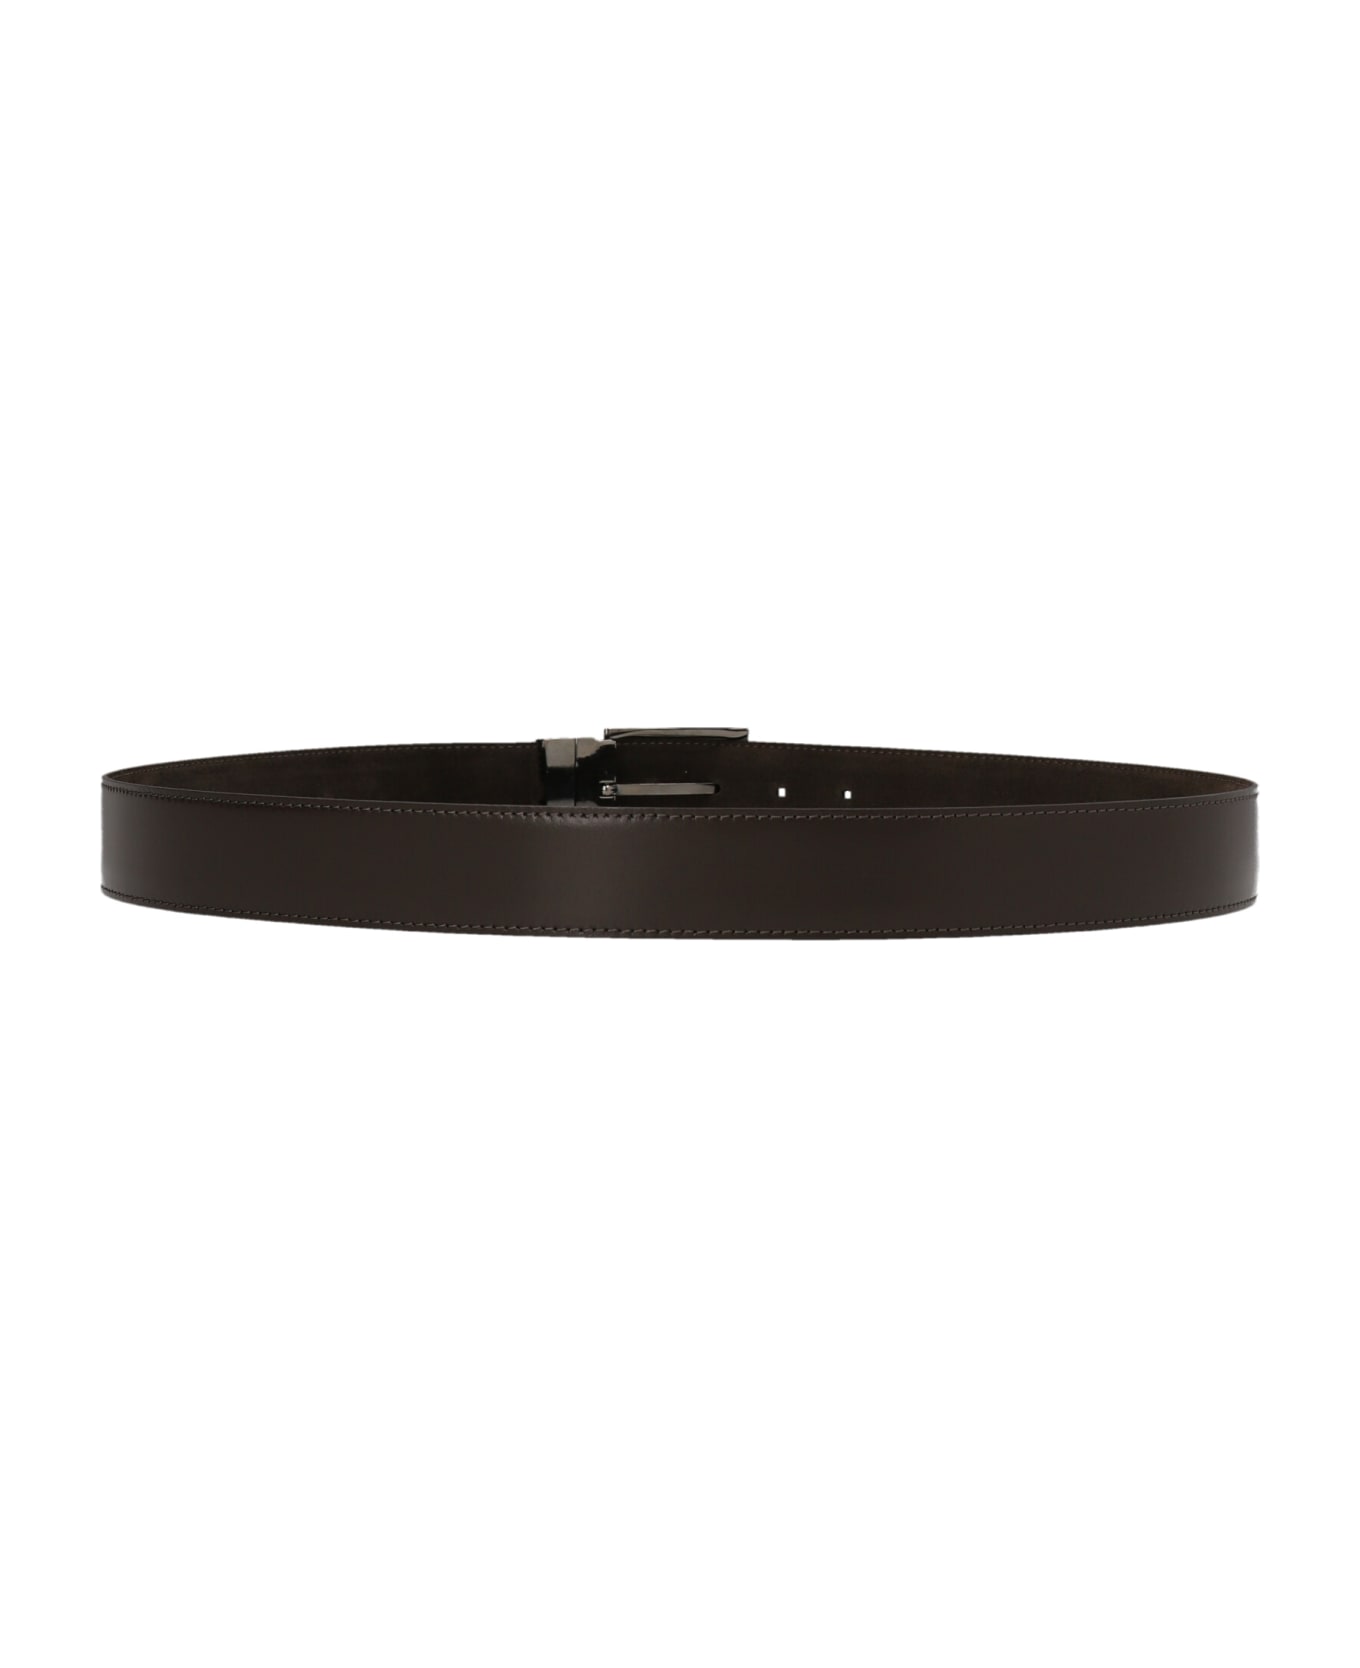 D'Amico Reversible Suede Leather Belt - Brown